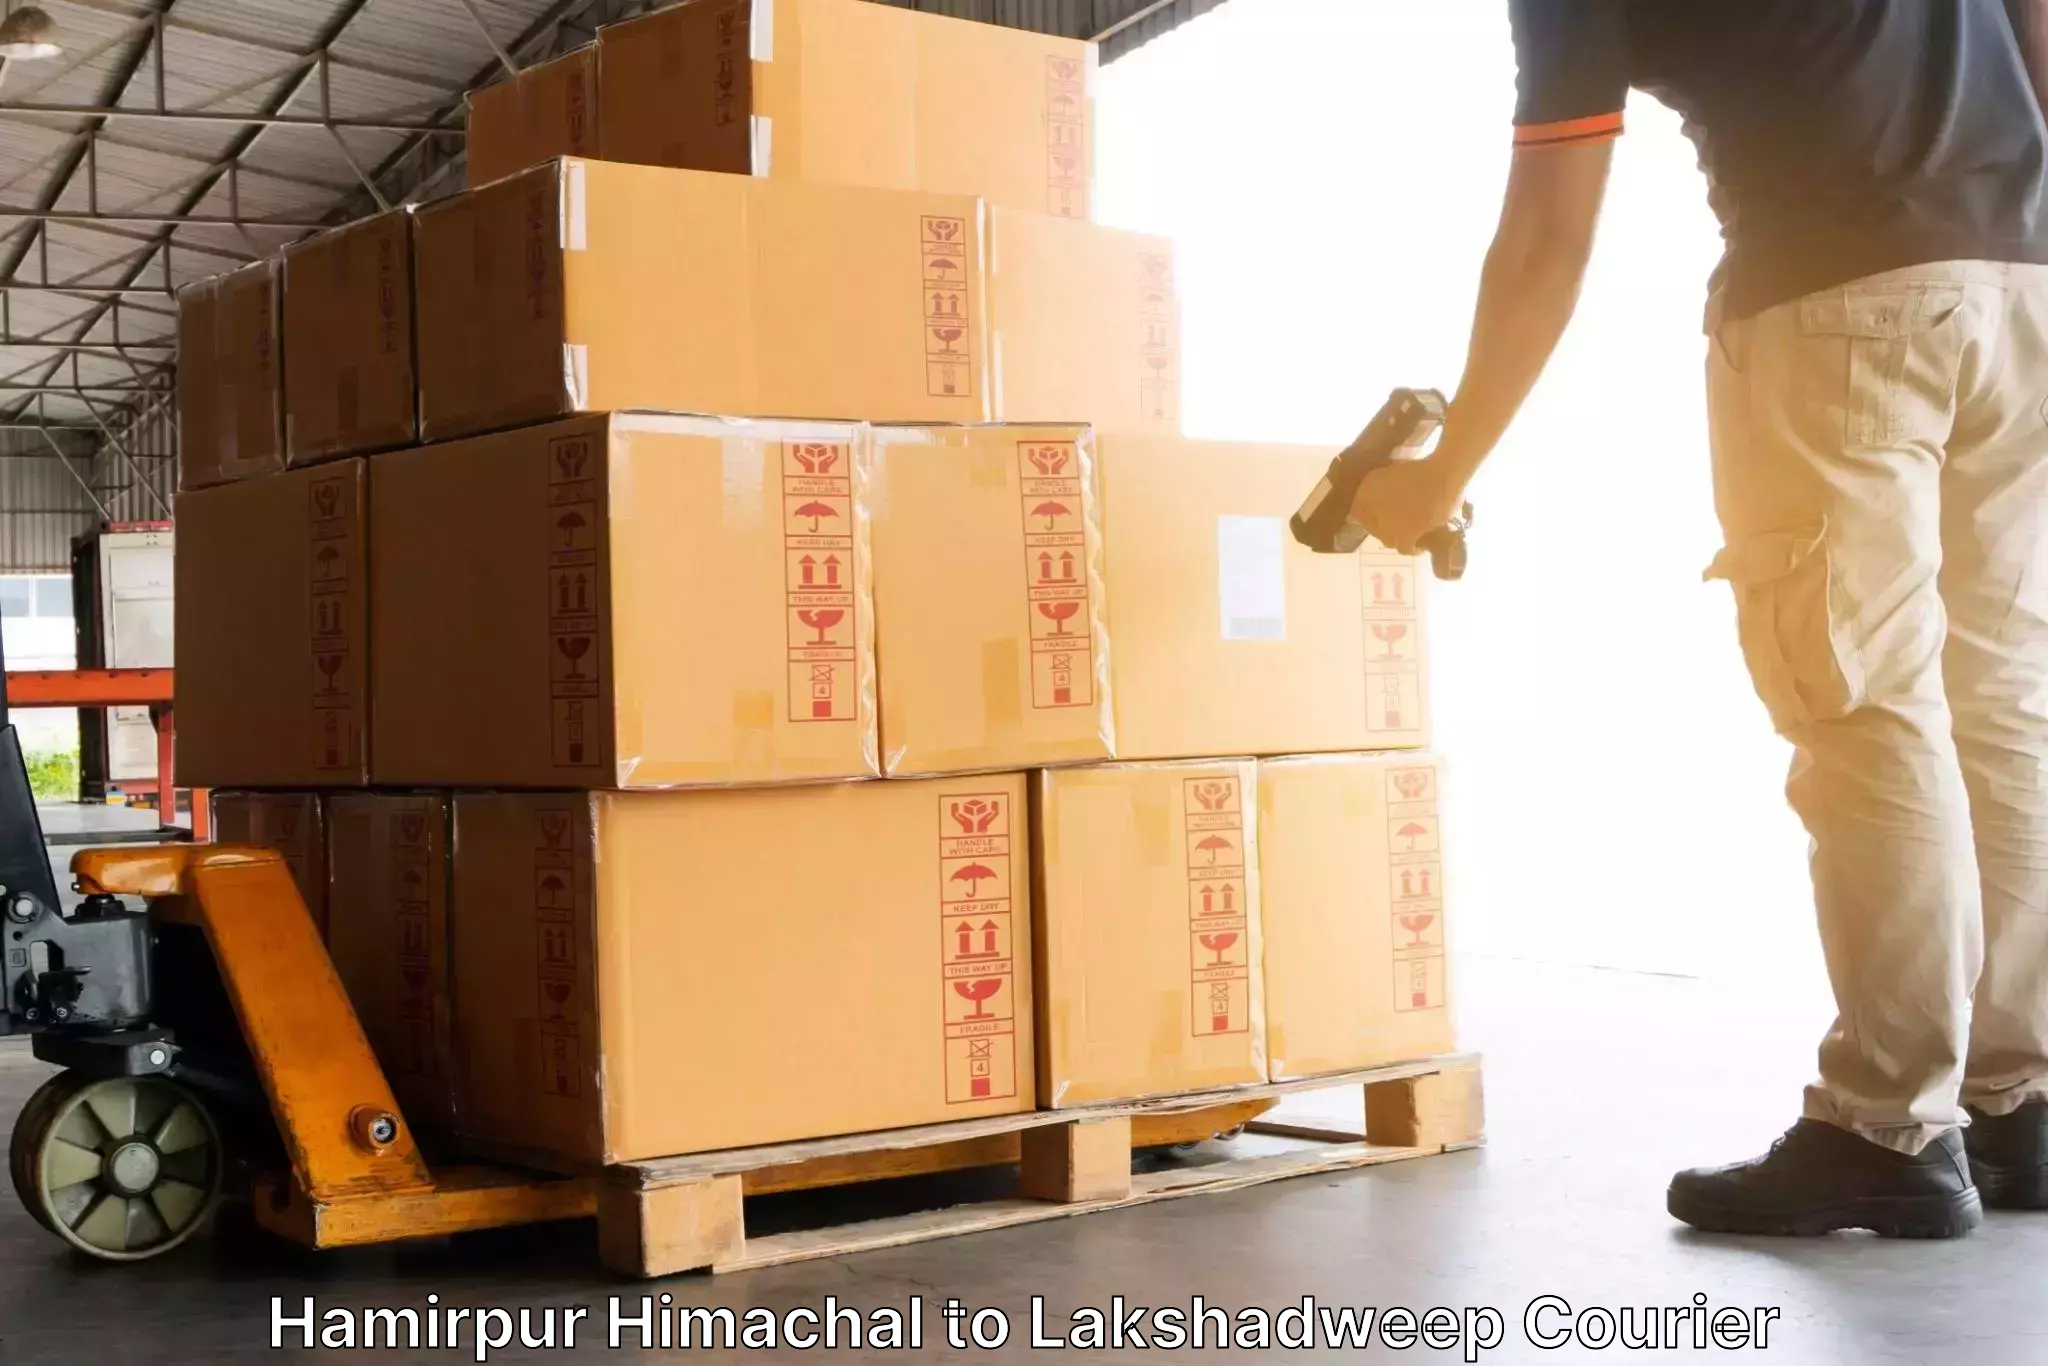 Domestic courier Hamirpur Himachal to Lakshadweep